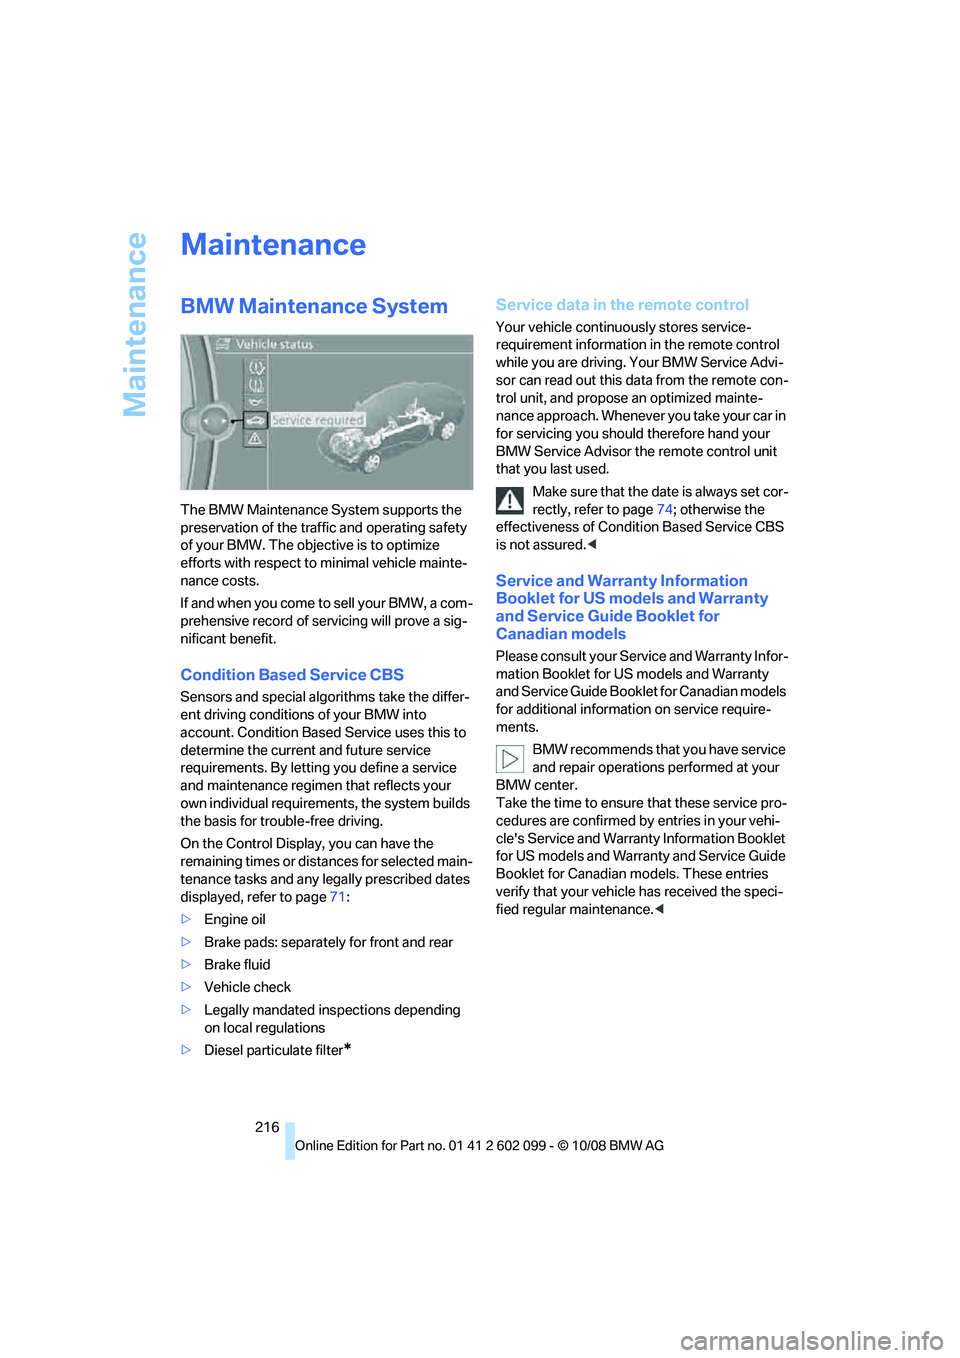 BMW 3 SERIES 2009  Owners Manual Maintenance
216
Maintenance
BMW Maintenance System
The BMW Maintenance System supports the 
preservation of the traffic and operating safety 
of your BMW. The objective is to optimize 
efforts with re